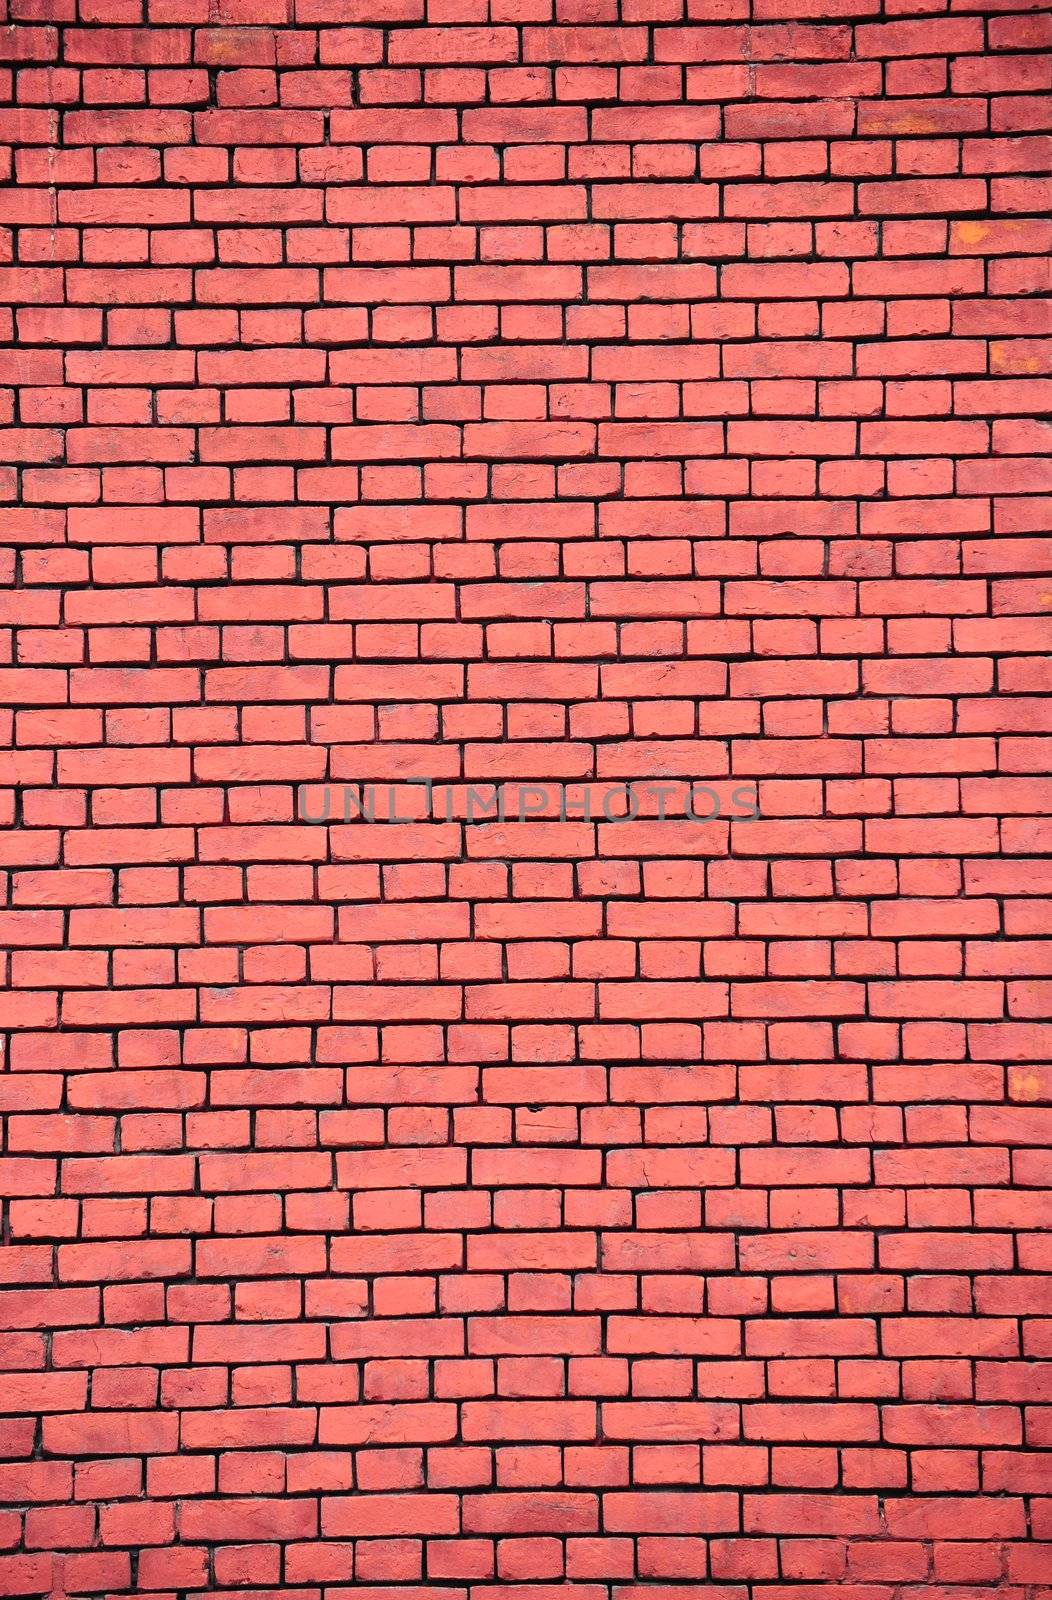 
Dark Red Brick Wall, Can Be Used As Background